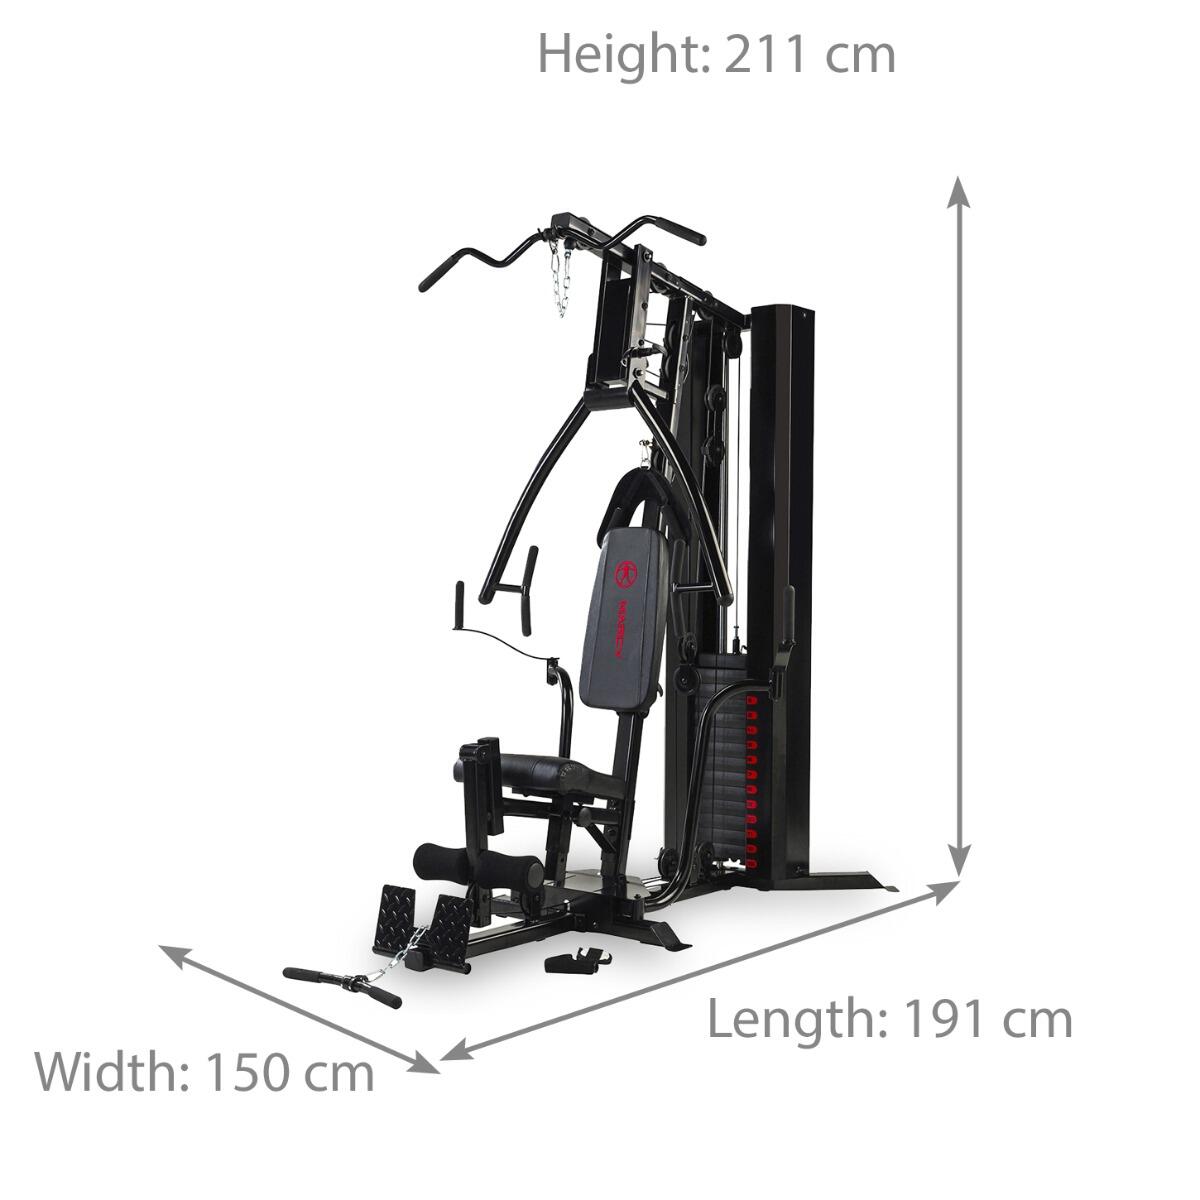 MARCY ECLIPSE HG5000 DELUXE HOME MULTI GYM 5/7